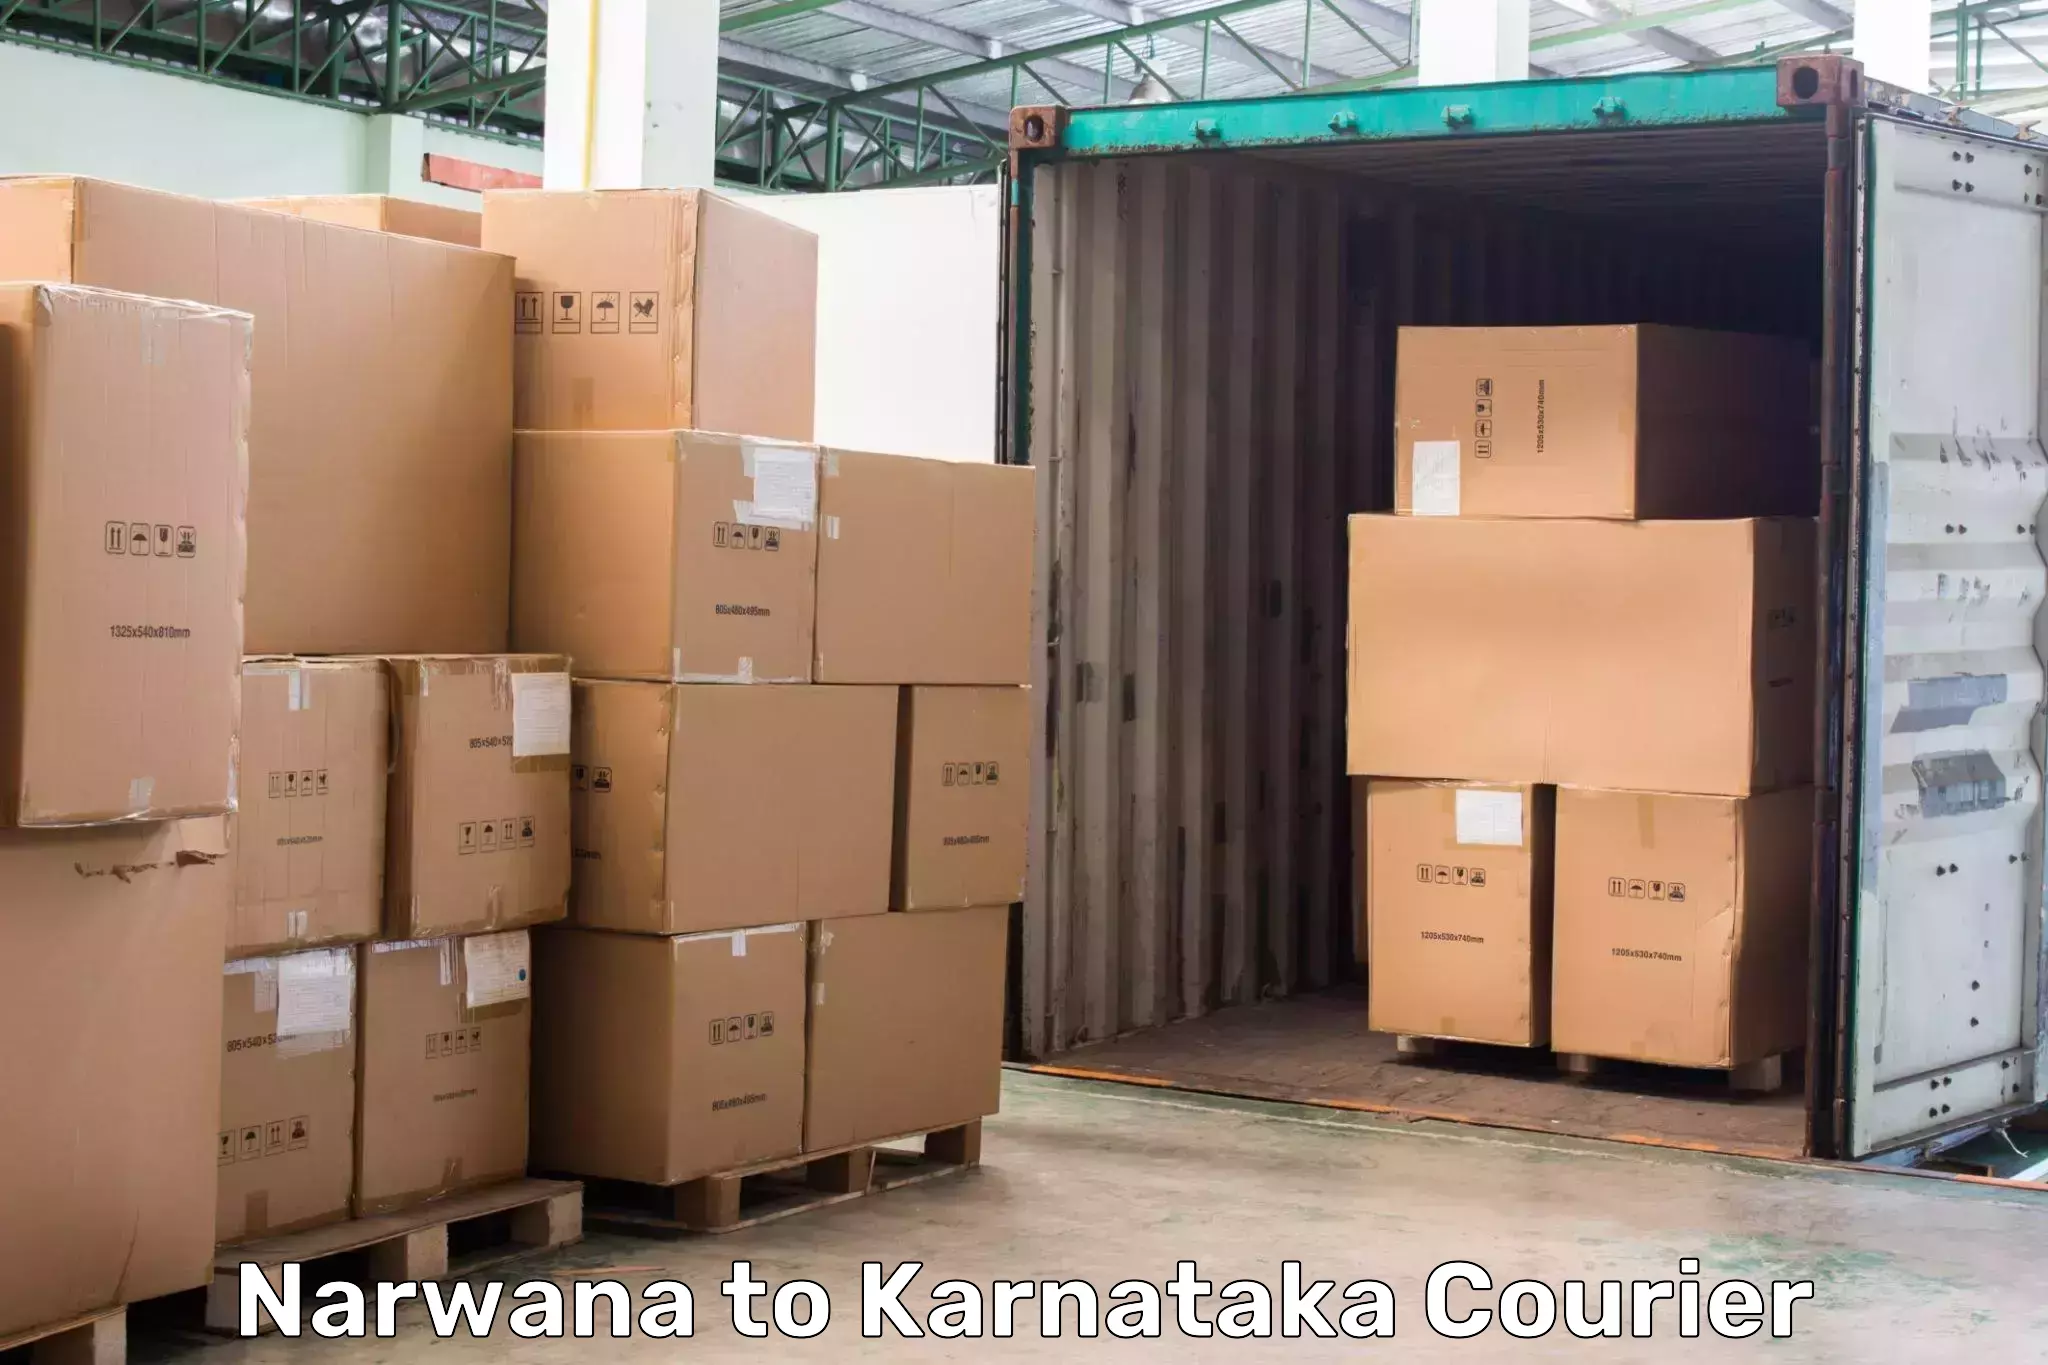 Automated parcel services Narwana to Bangalore